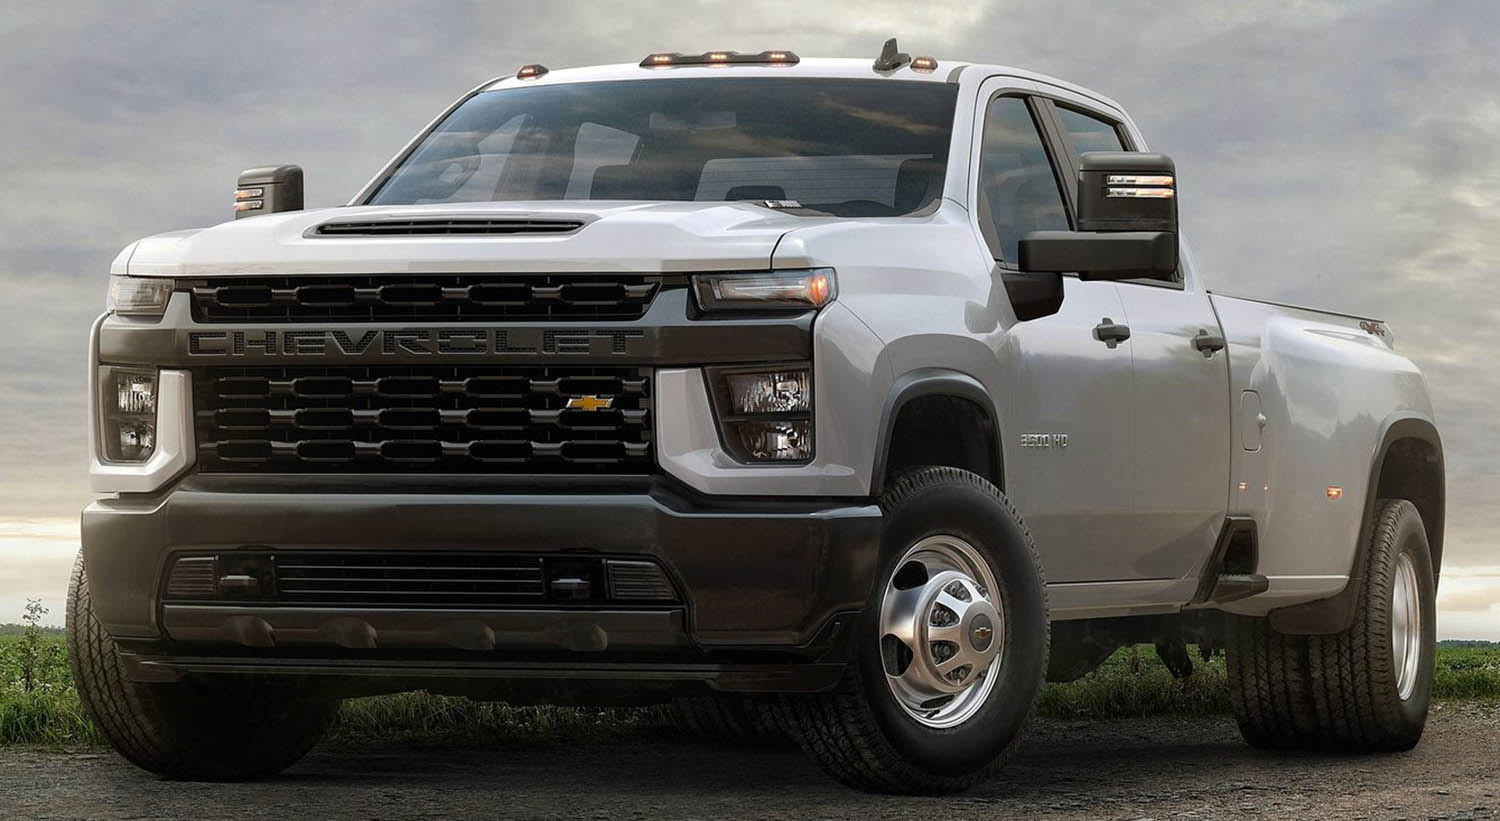 Chevrolet Silverado HD – The Strongest And Most Capable HD Generation Ever